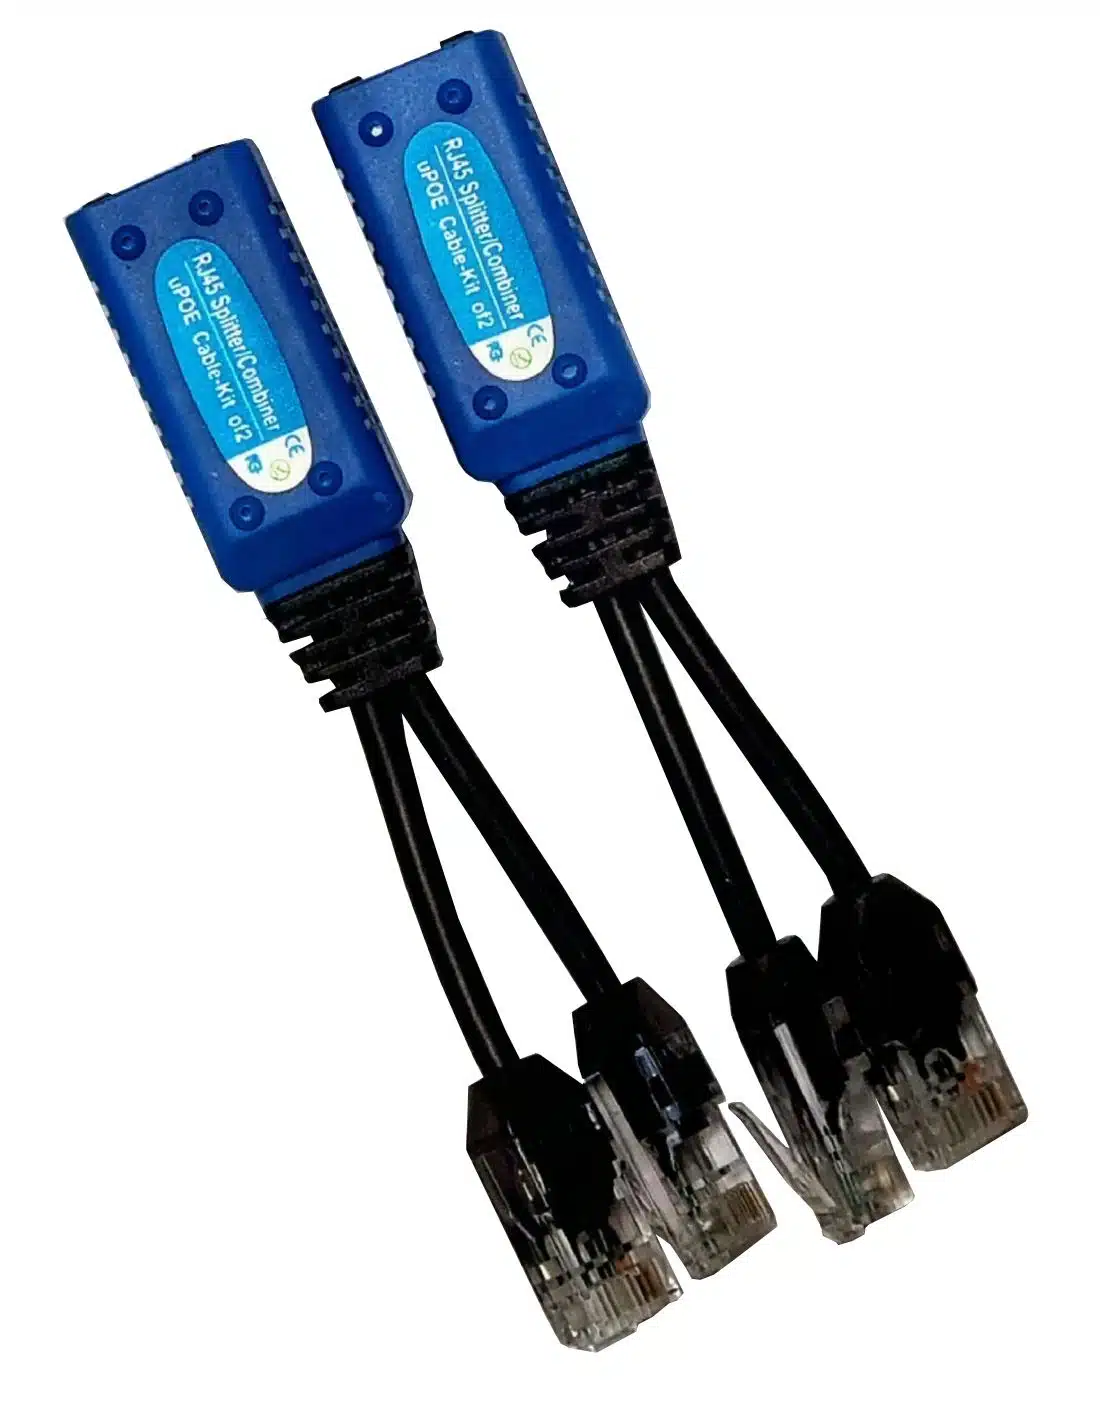 ethernet splitter combiner upoe use 2 cameras over 1 cable suit swann nvr ip cameras